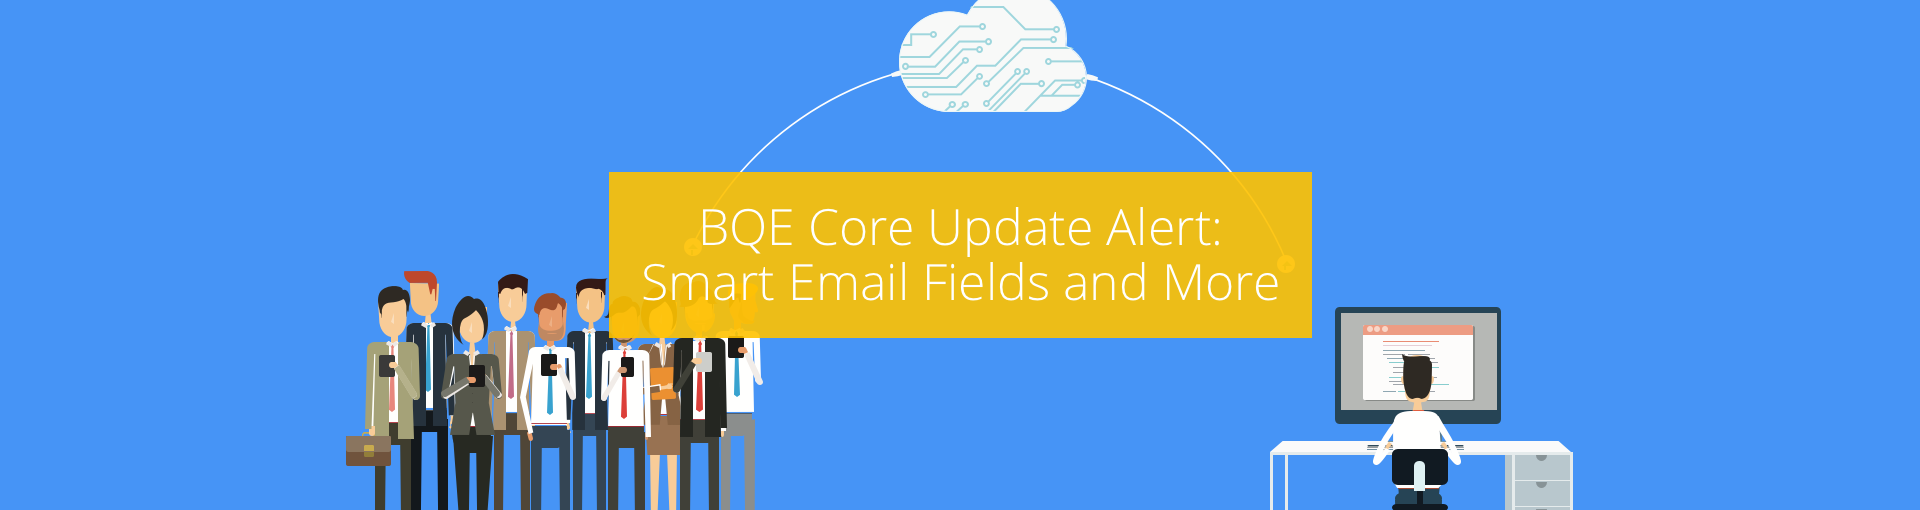 BQE CORE Update Alert: Smart Email Fields and More Featured Image